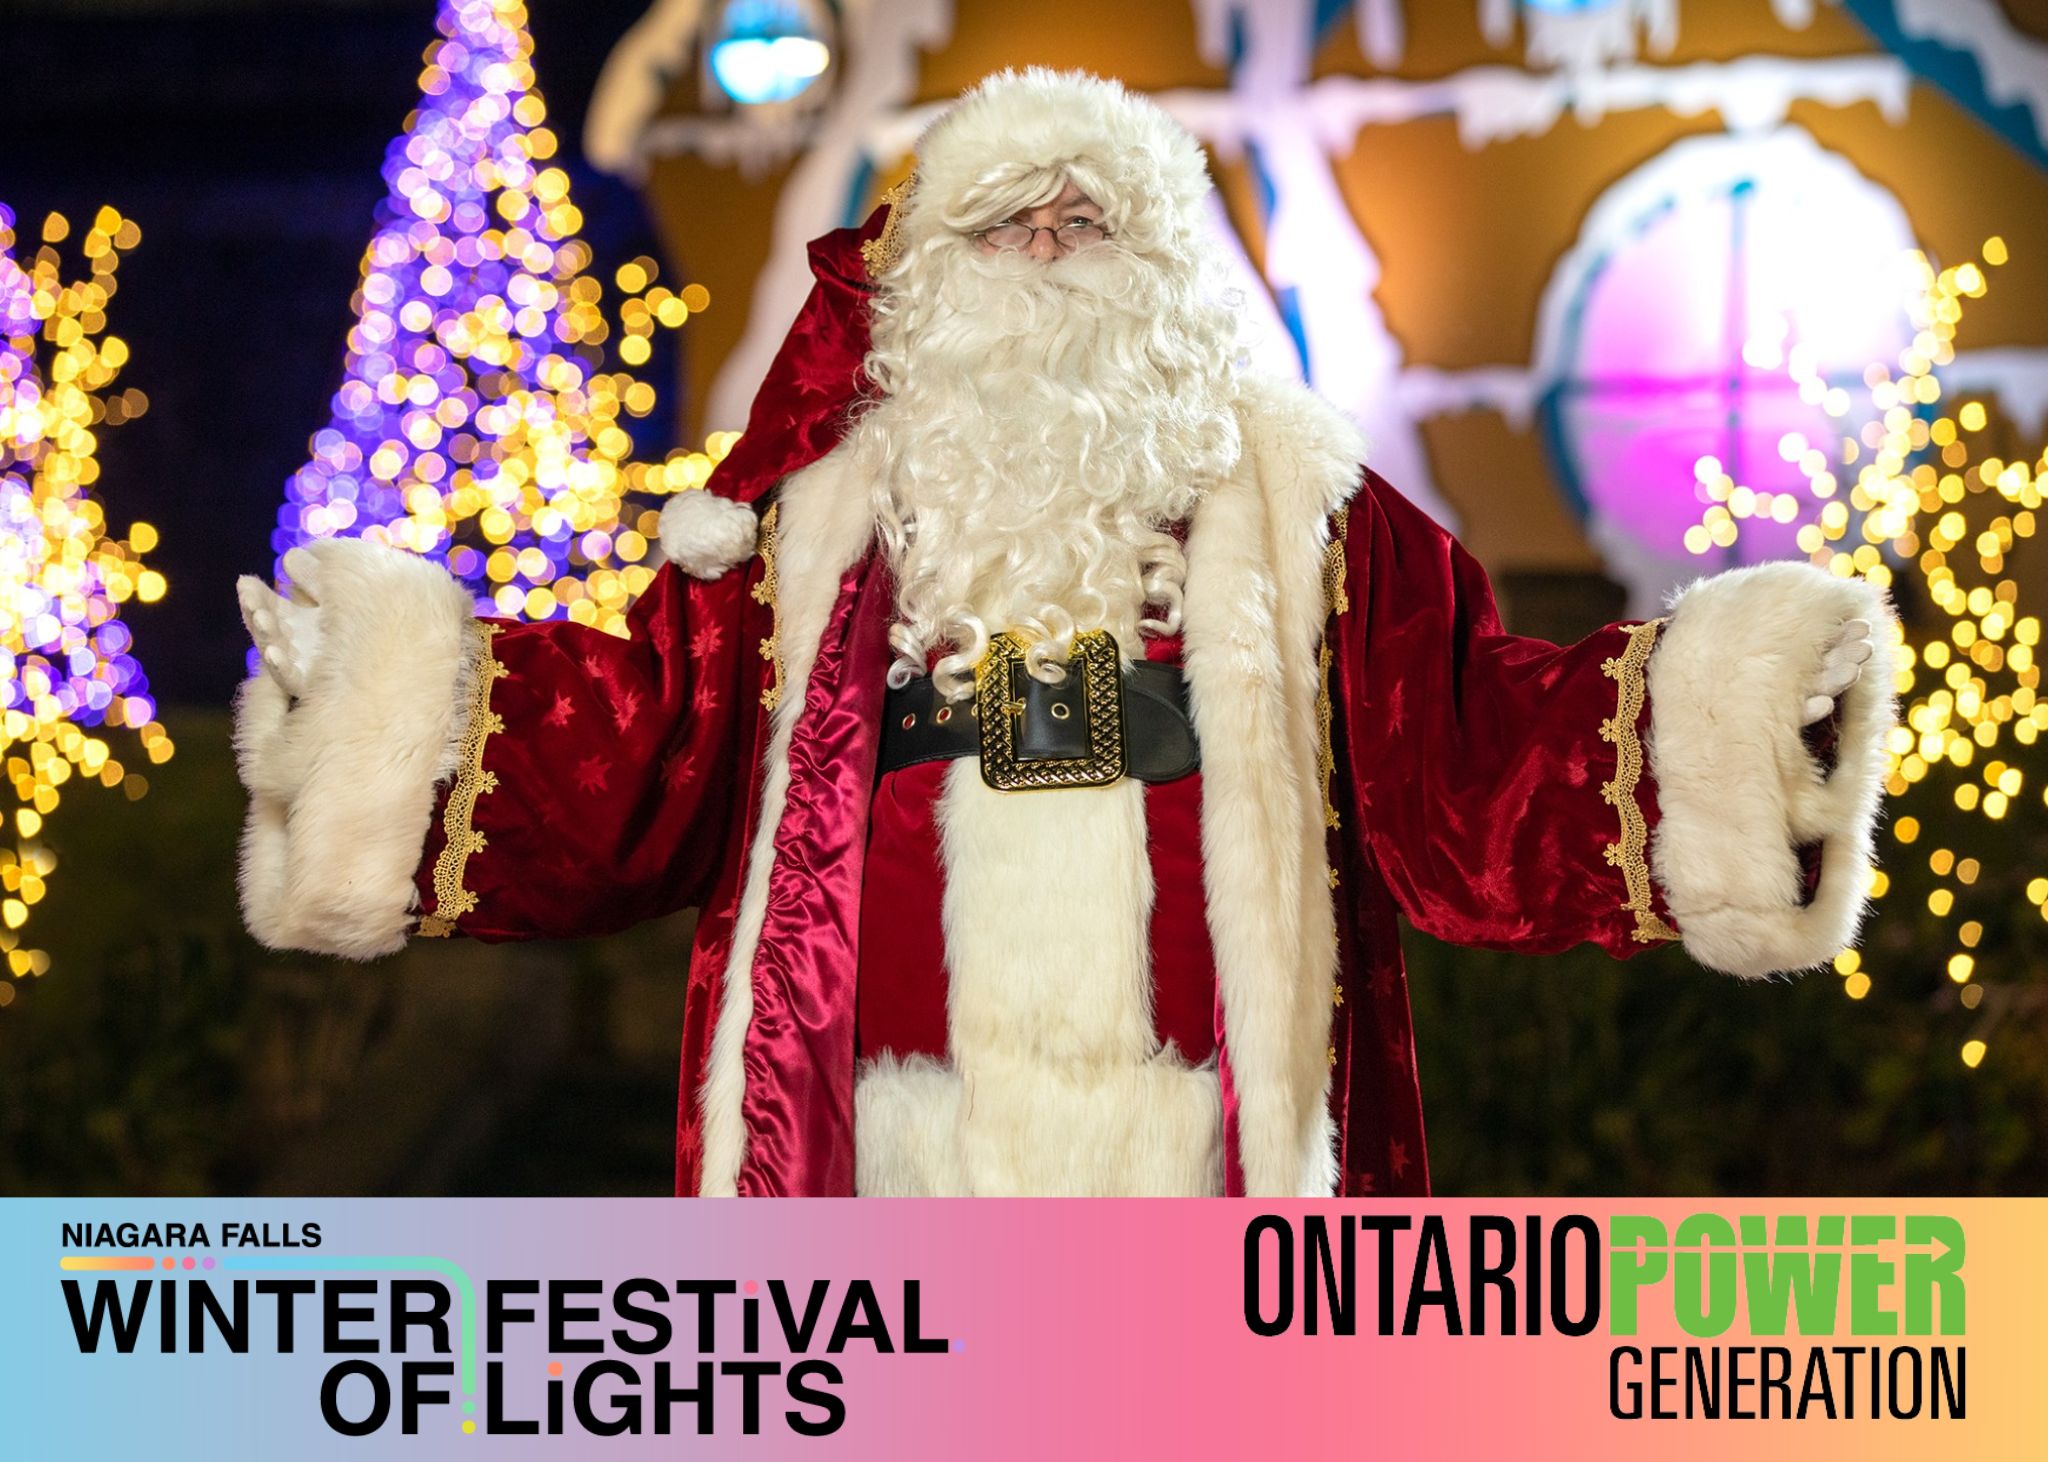 17-facts-about-ontario-power-generation-winter-festival-of-lights